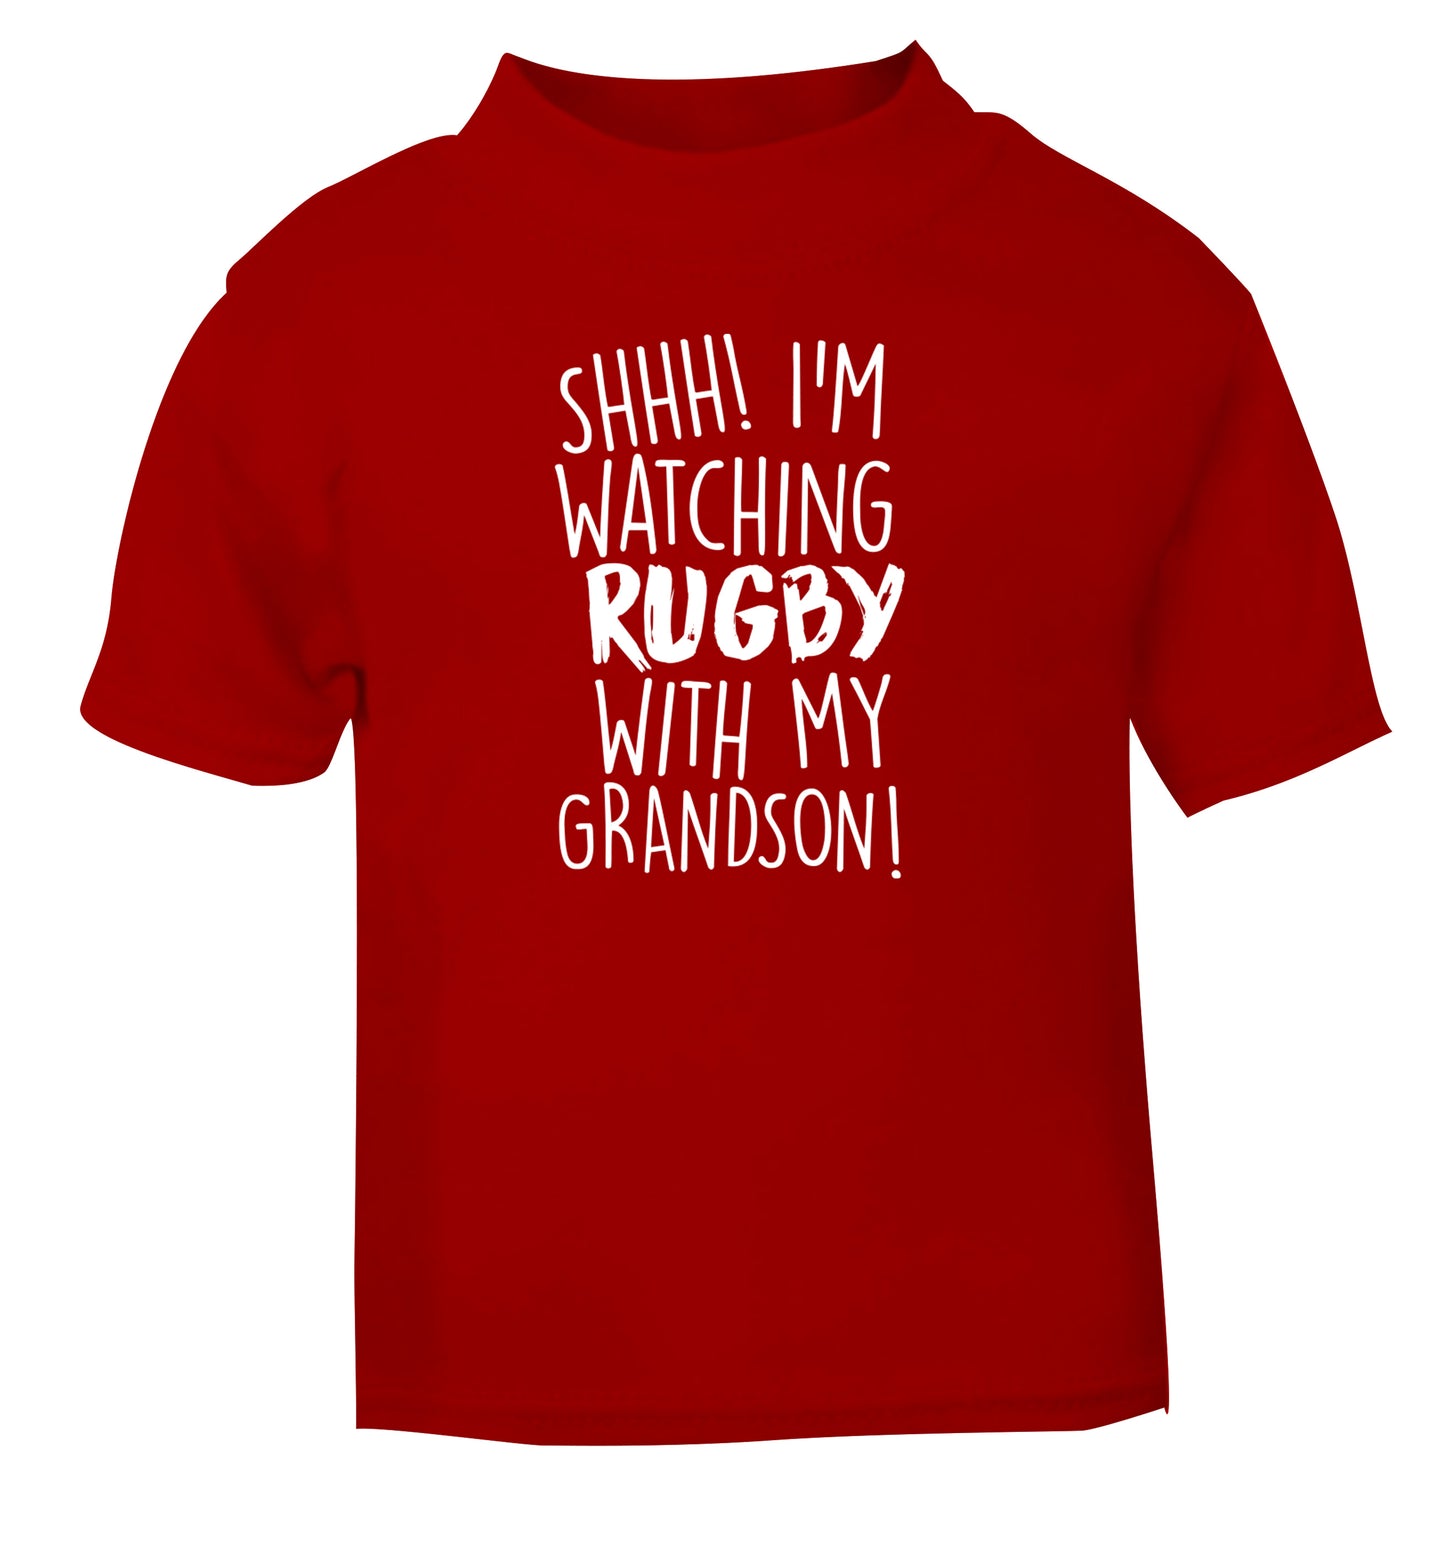 Shh I'm watching rugby with my grandson red Baby Toddler Tshirt 2 Years